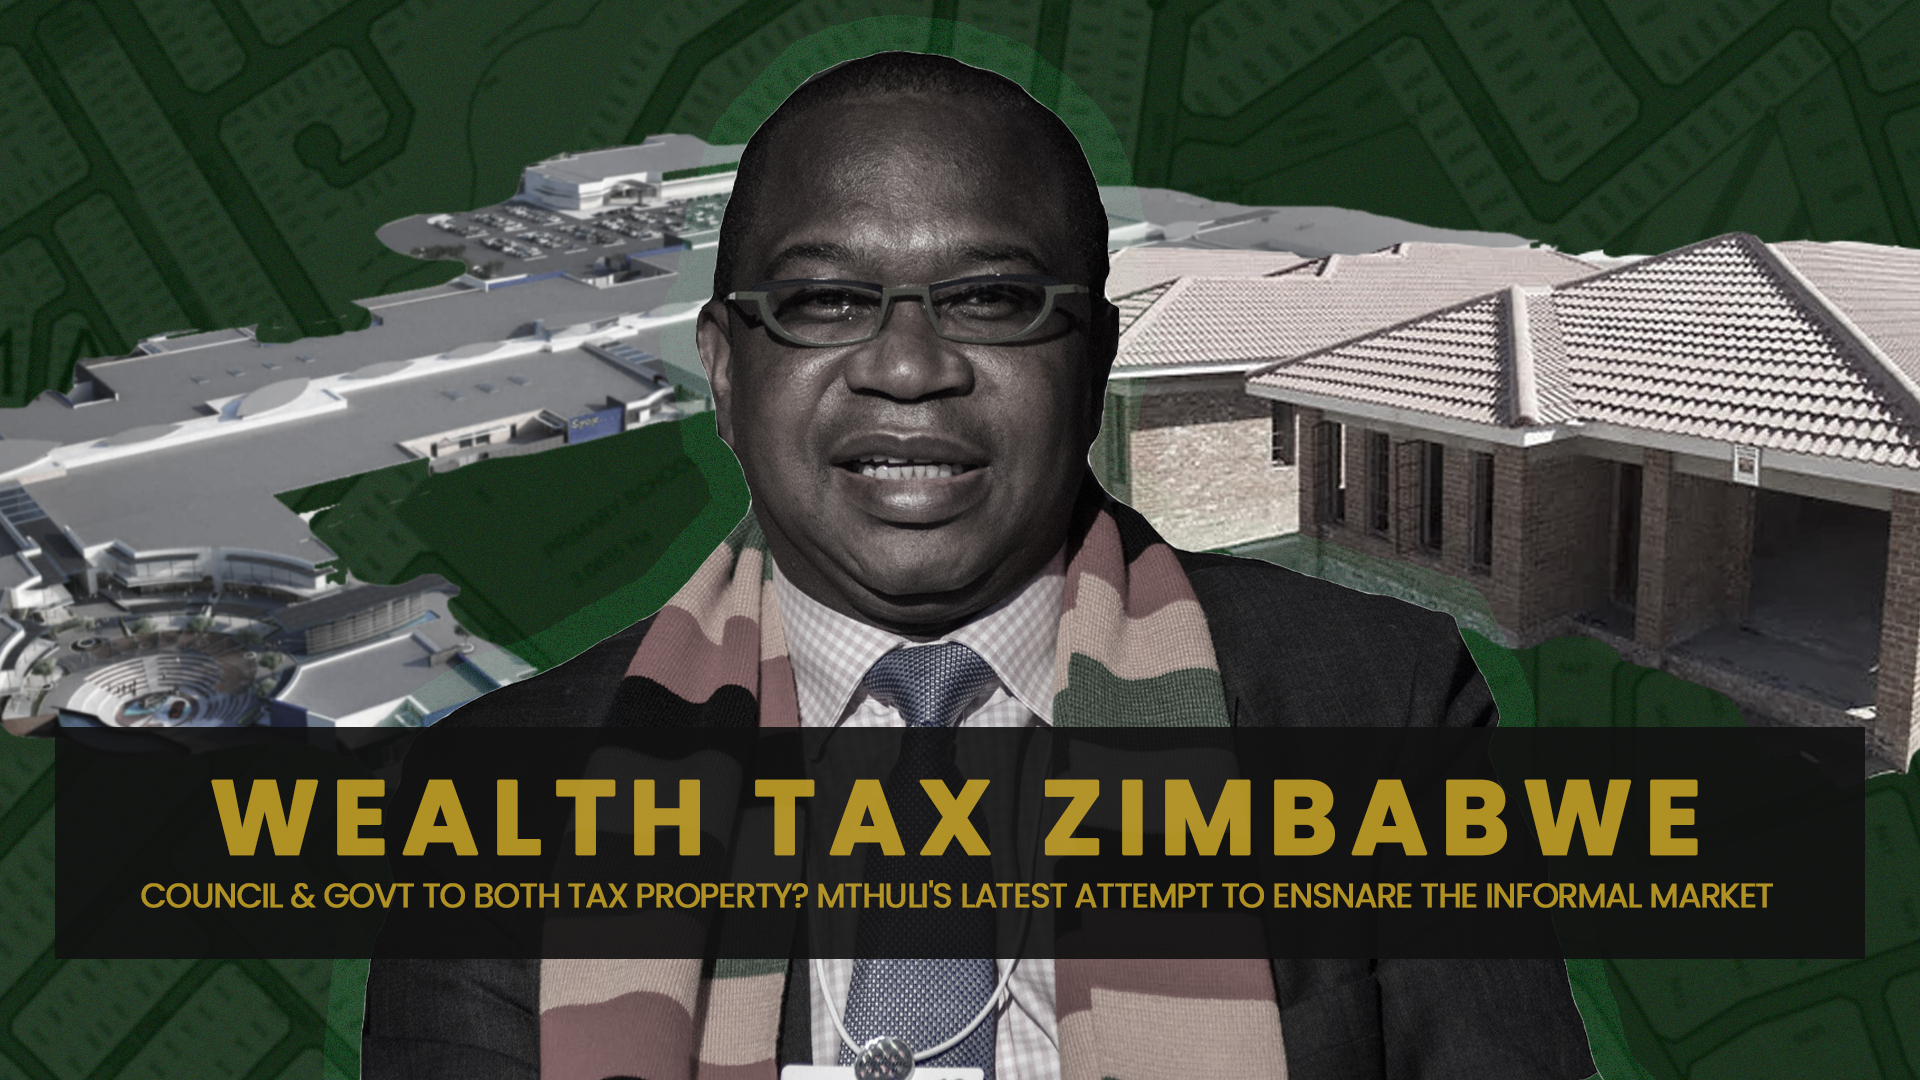 Wealth Tax Zimbabwe: Council & govt to both tax property? Mthuli’s latest attempt to ensnare the informal market